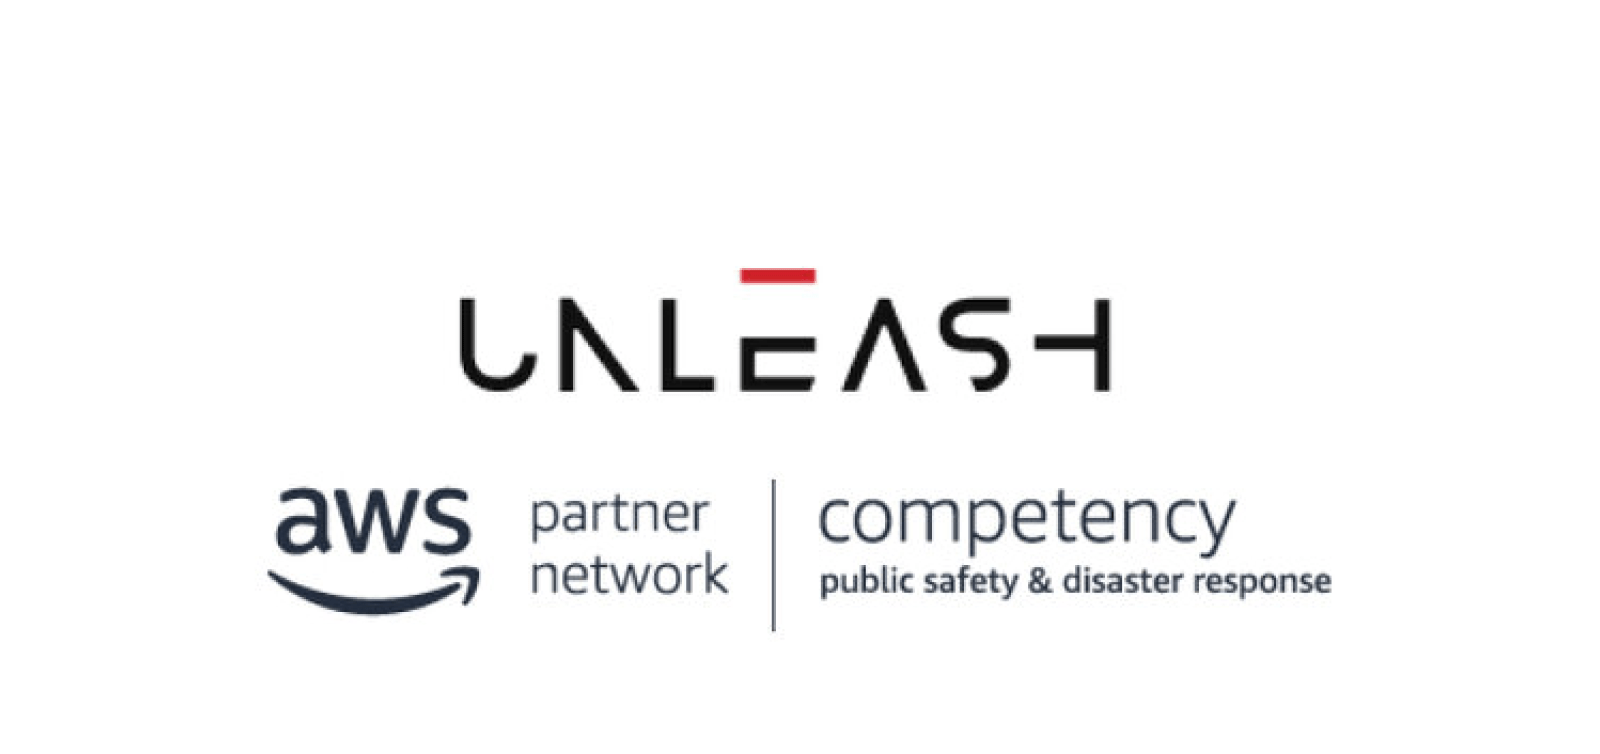 Read full post: Unleash live Achieves AWS Public Safety & Disaster Response Competency